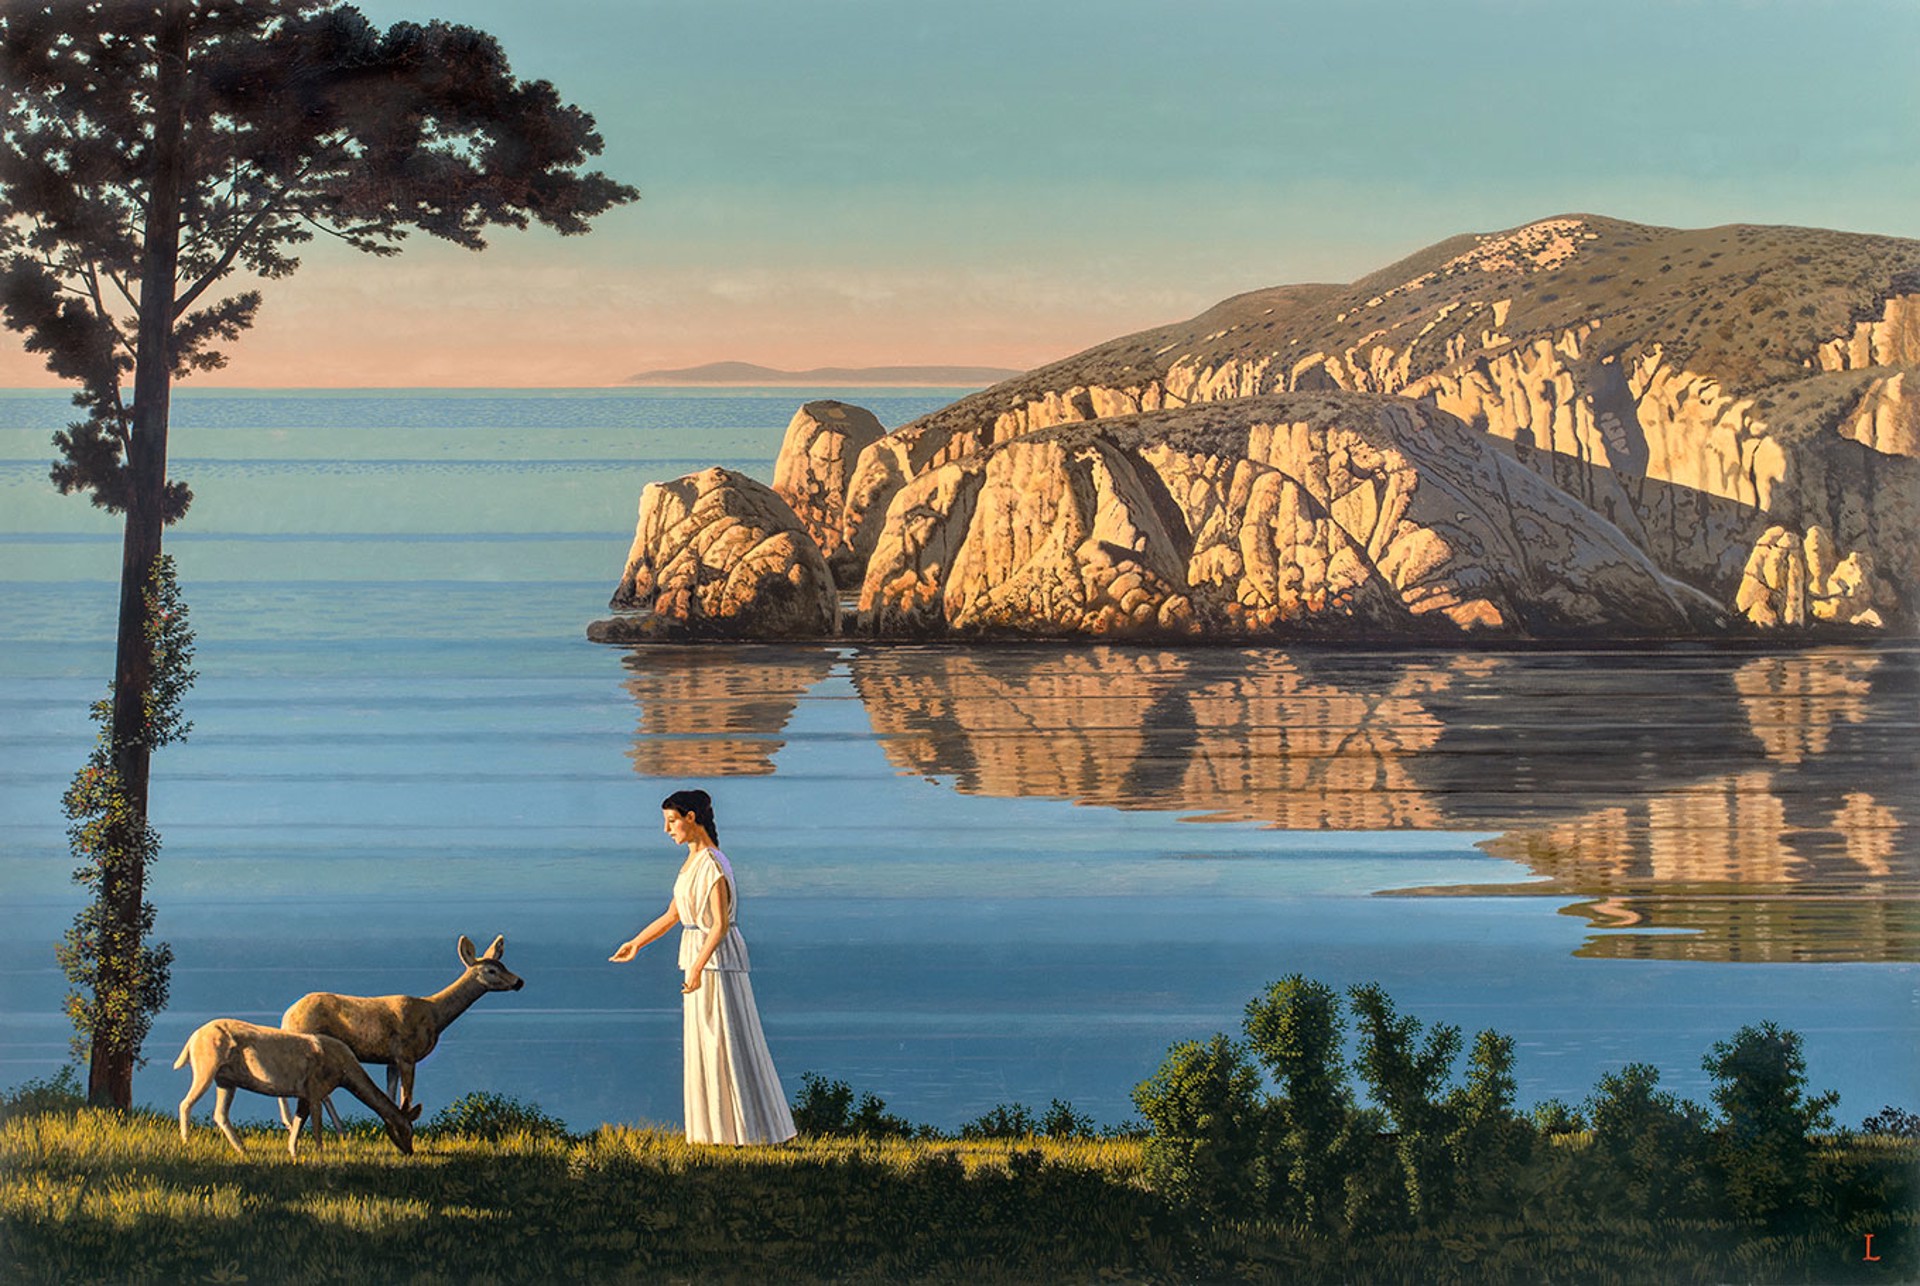 Legend, Woman with Deer by David Ligare